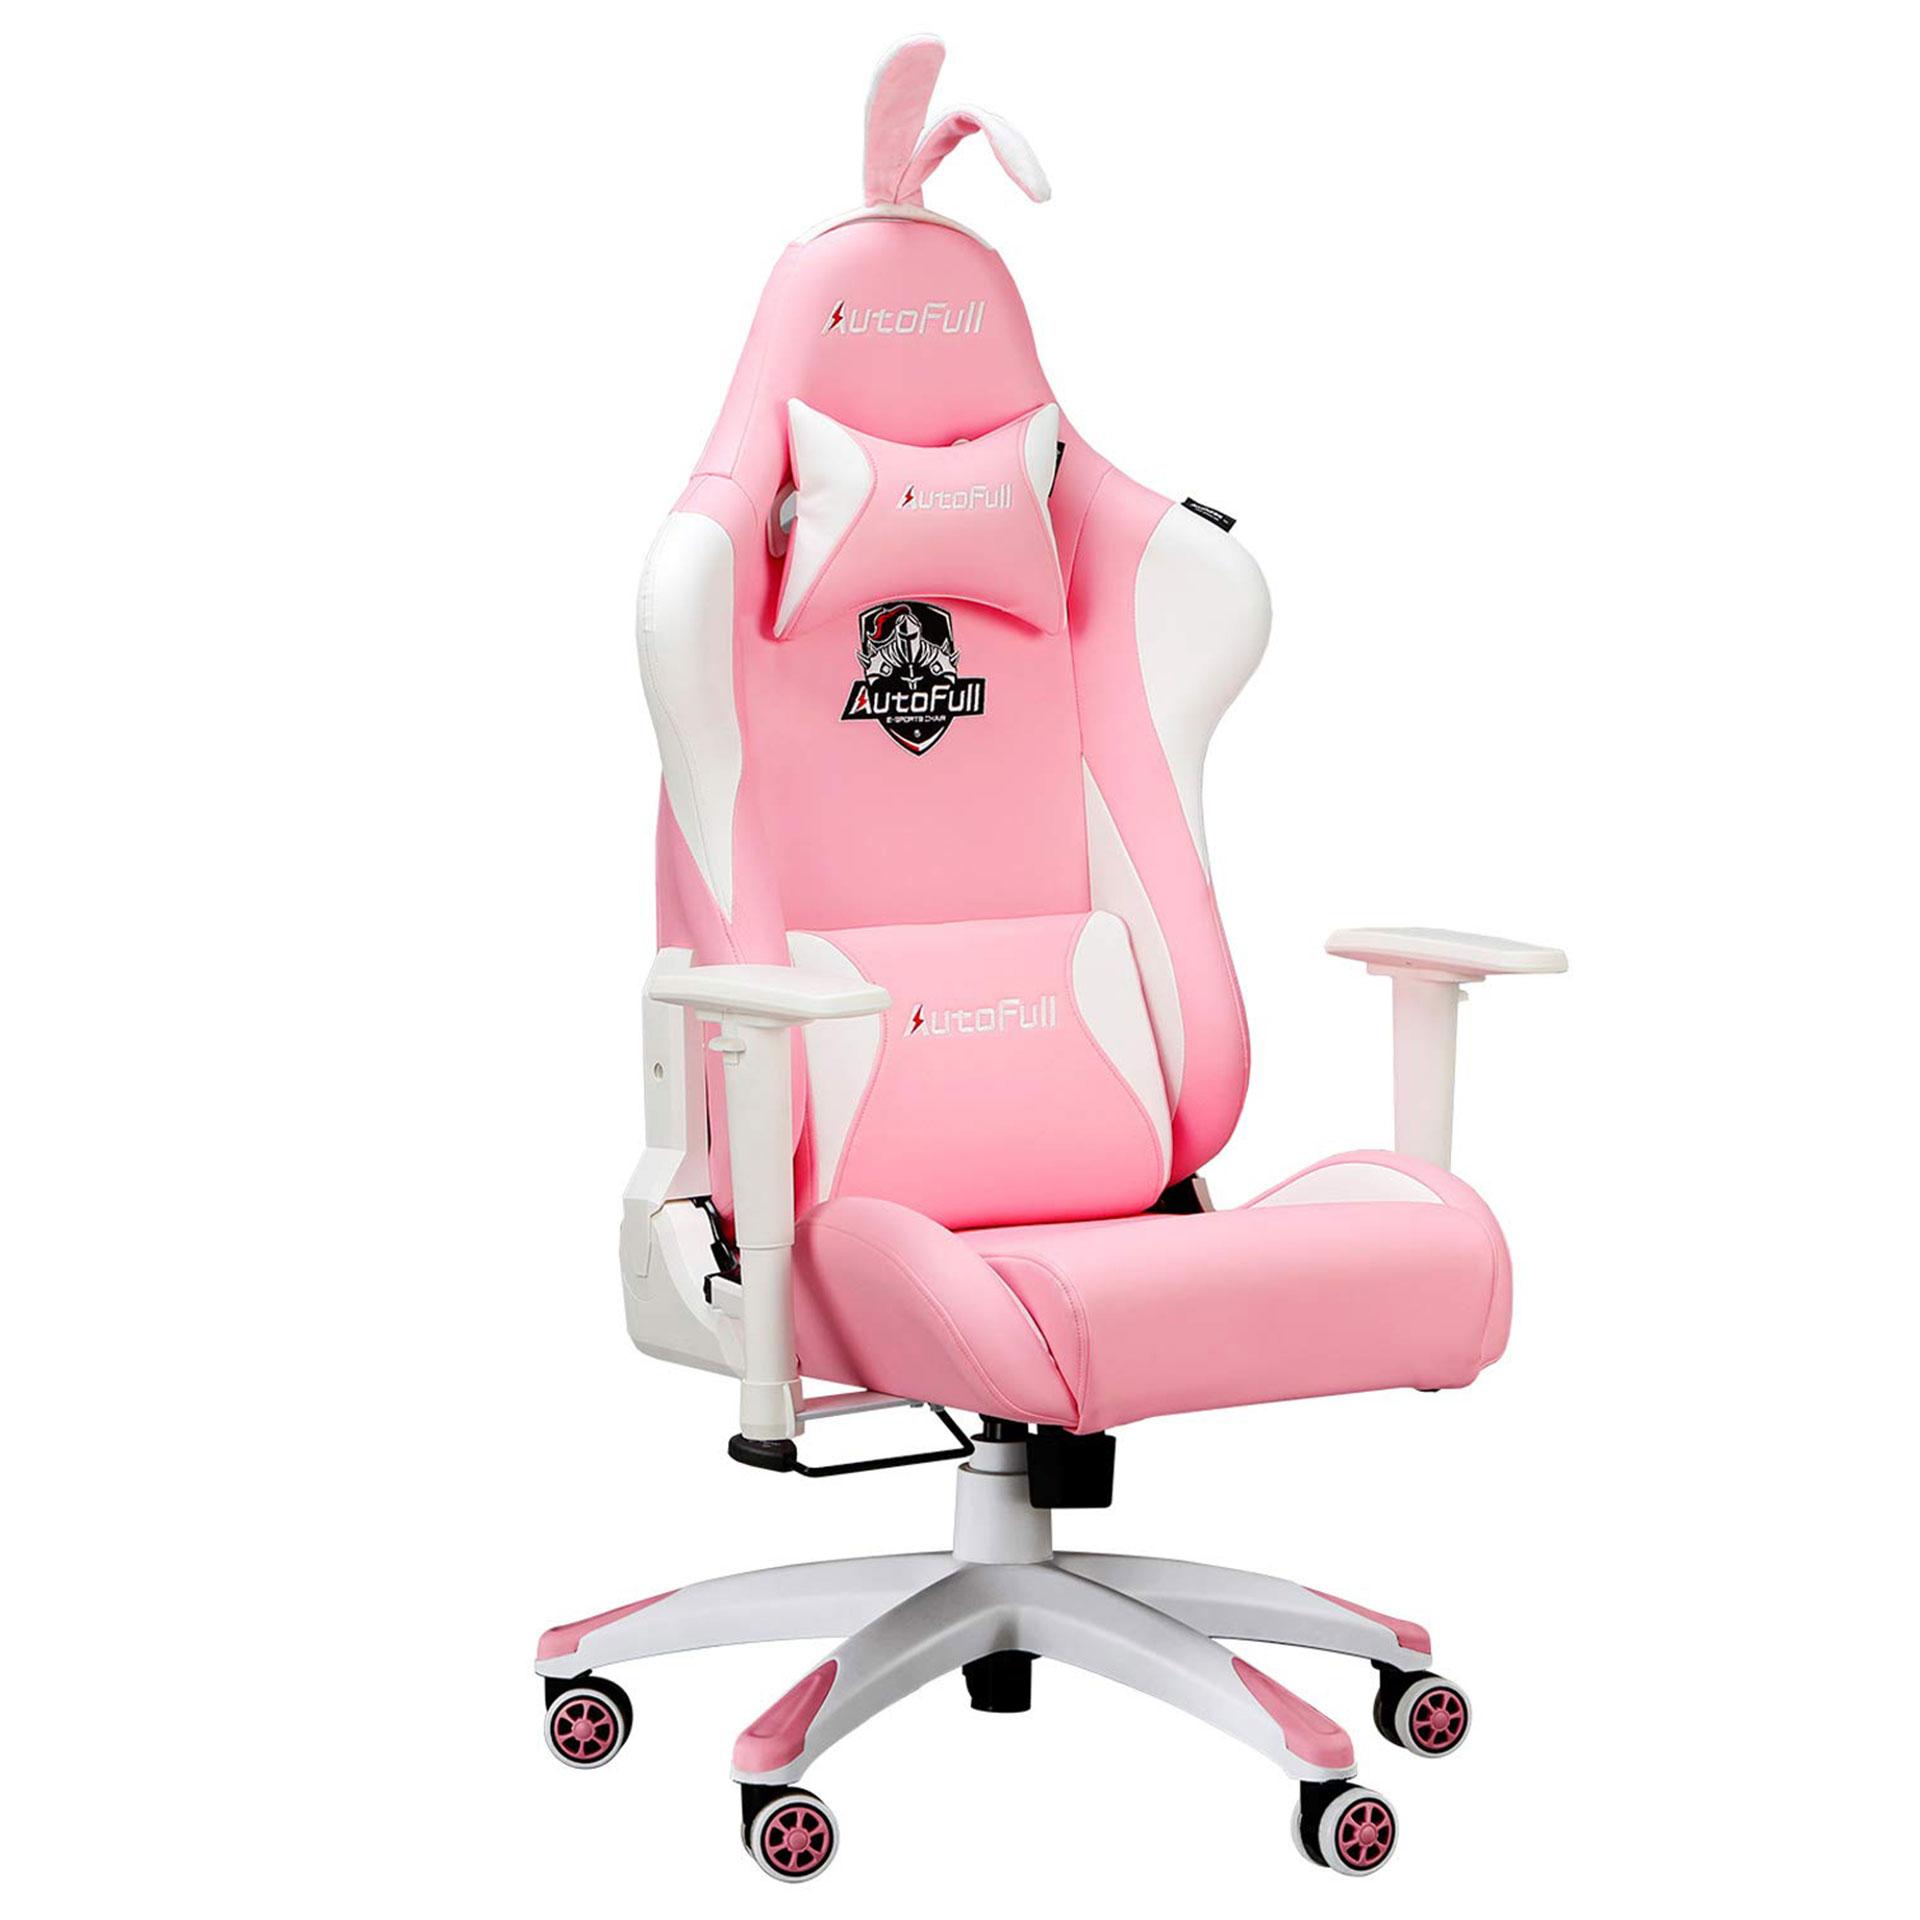 Exactly how to select a gaming chair 20190823171816_thumb_big